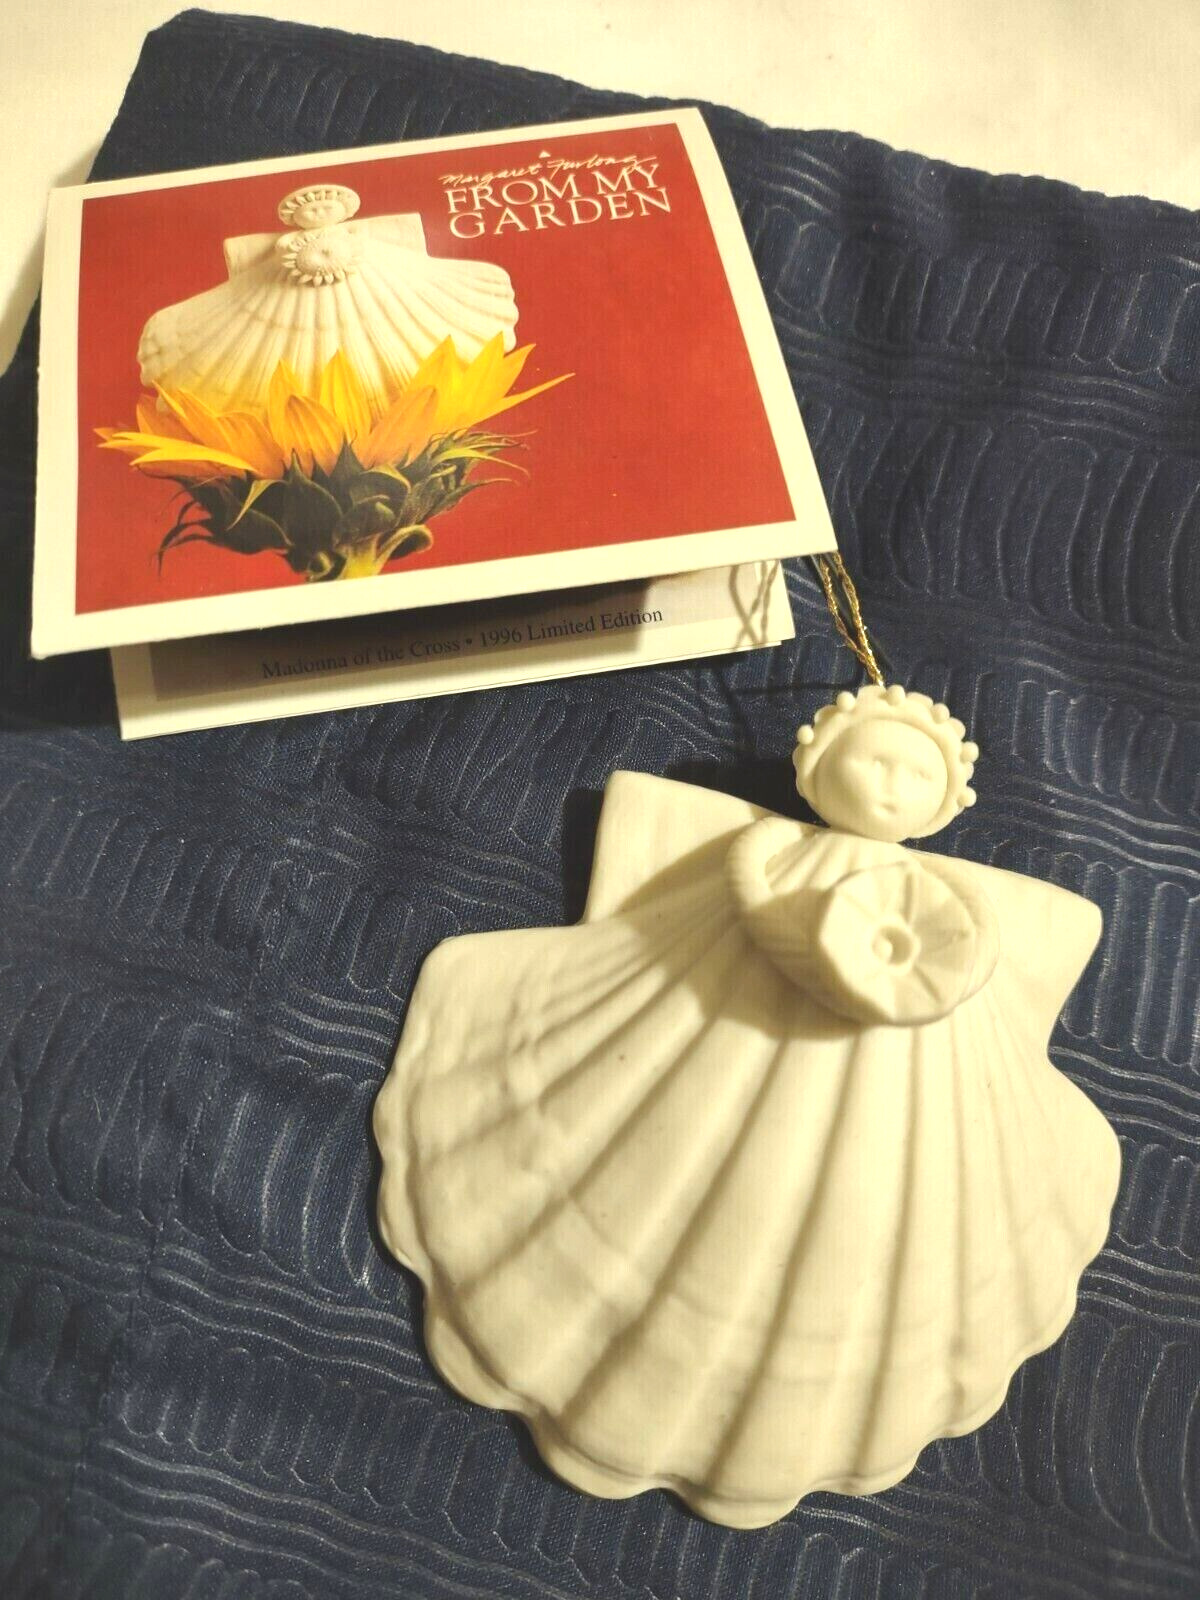 VTG Xmas Ornament Hand Crafted Shell Angel Margaret Furlong From my Garden 1996